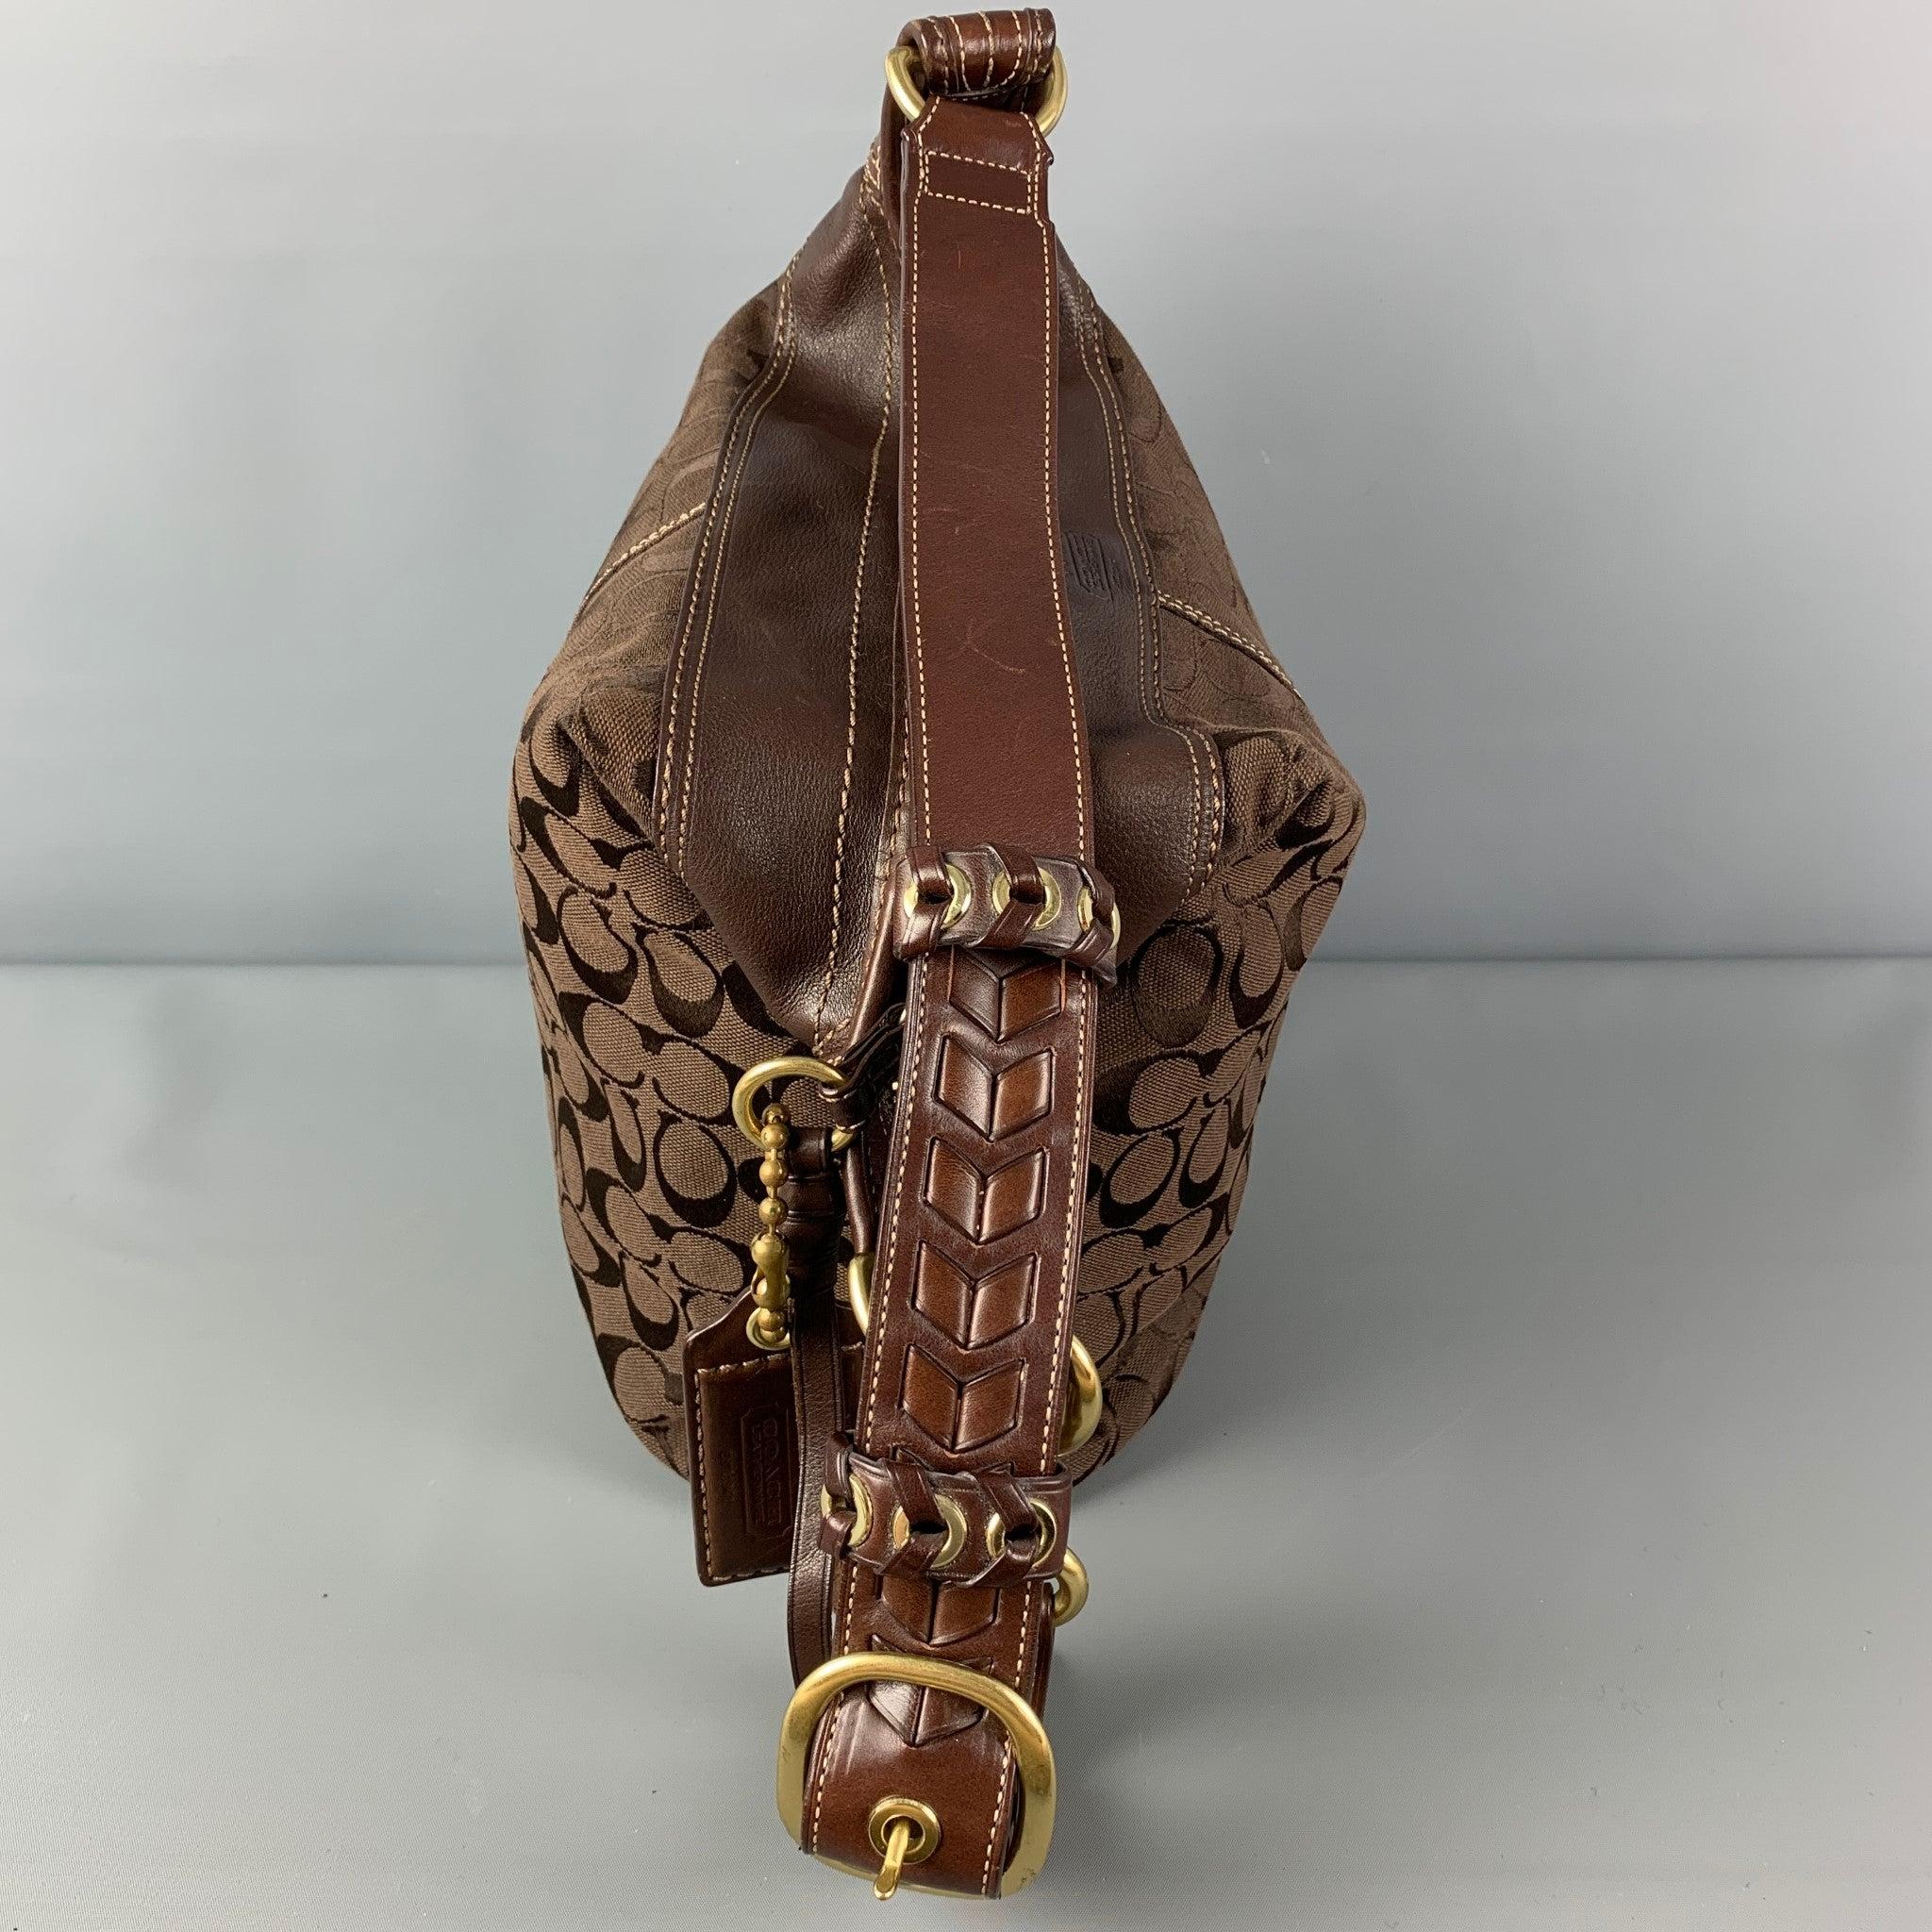 COACH bag comes in a brown monogram print canvas featuring a adjustable braided shoulder strap, gold tone hardware, contrast stitching, inner pocket, and a top zipper closure. Very Good
Pre-Owned Condition. Light wear. As-is. 

Marked:   F0768-11438